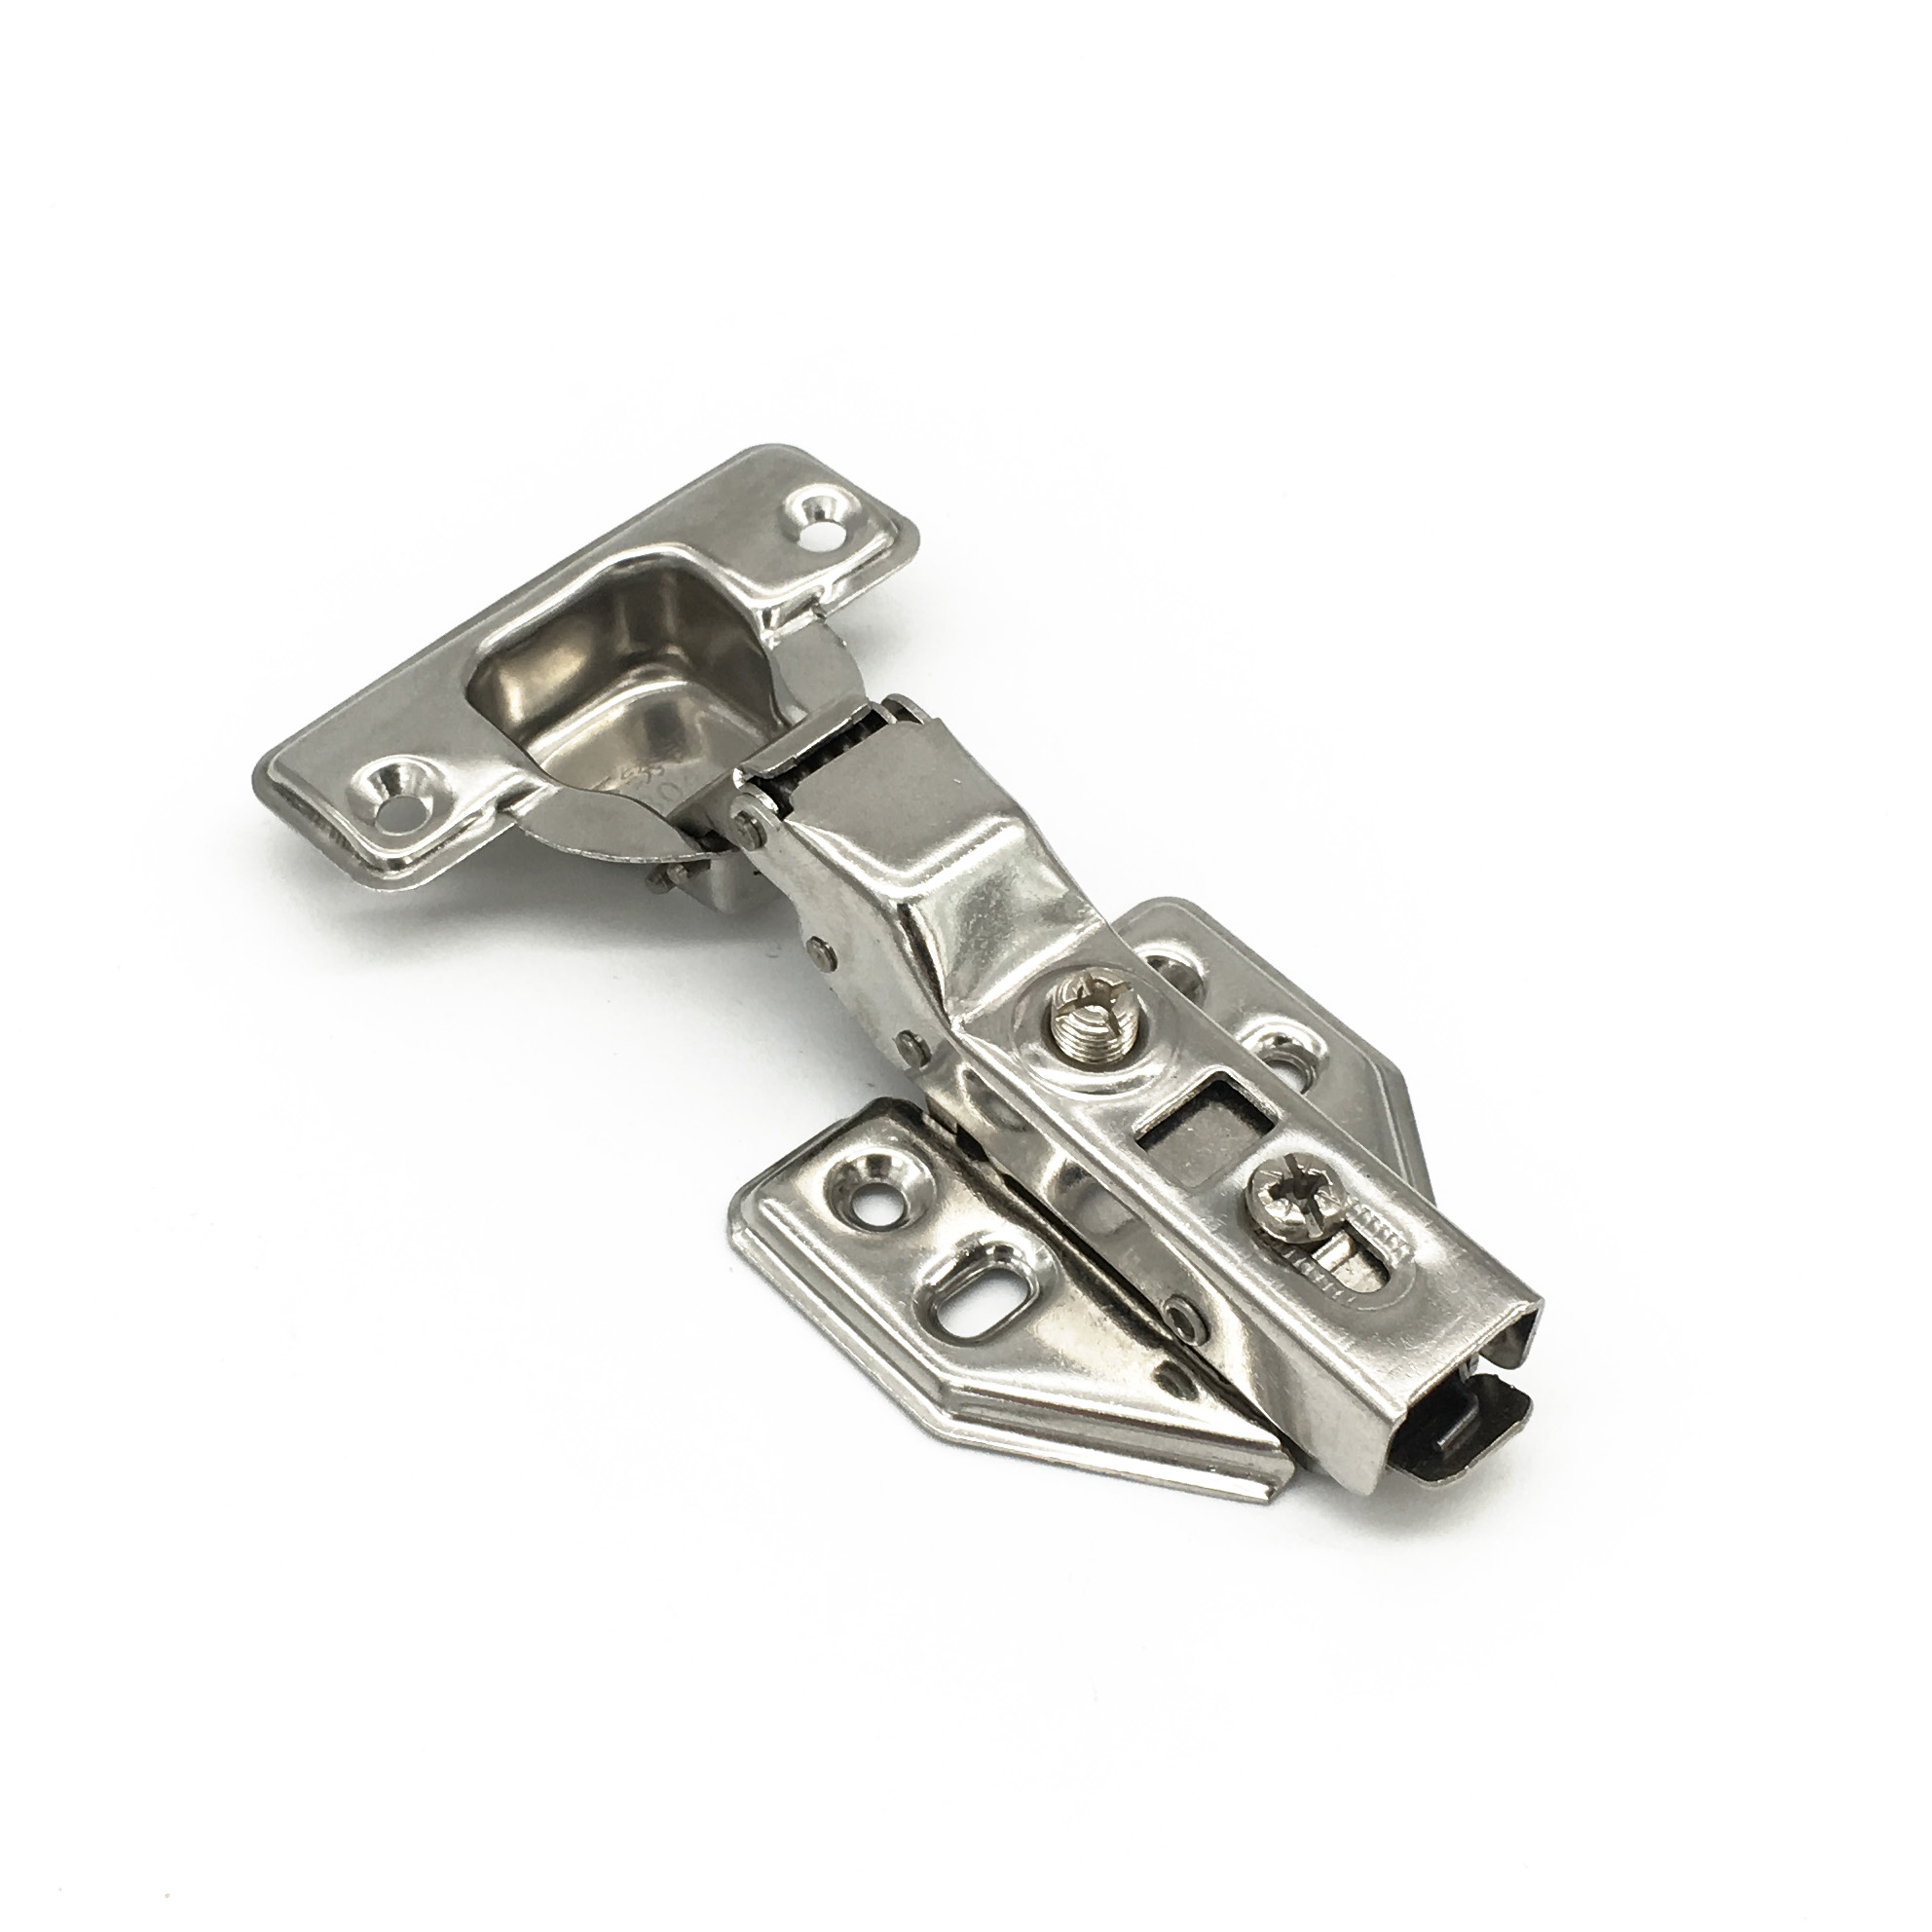 Removable stainless steel hydraulic hinge